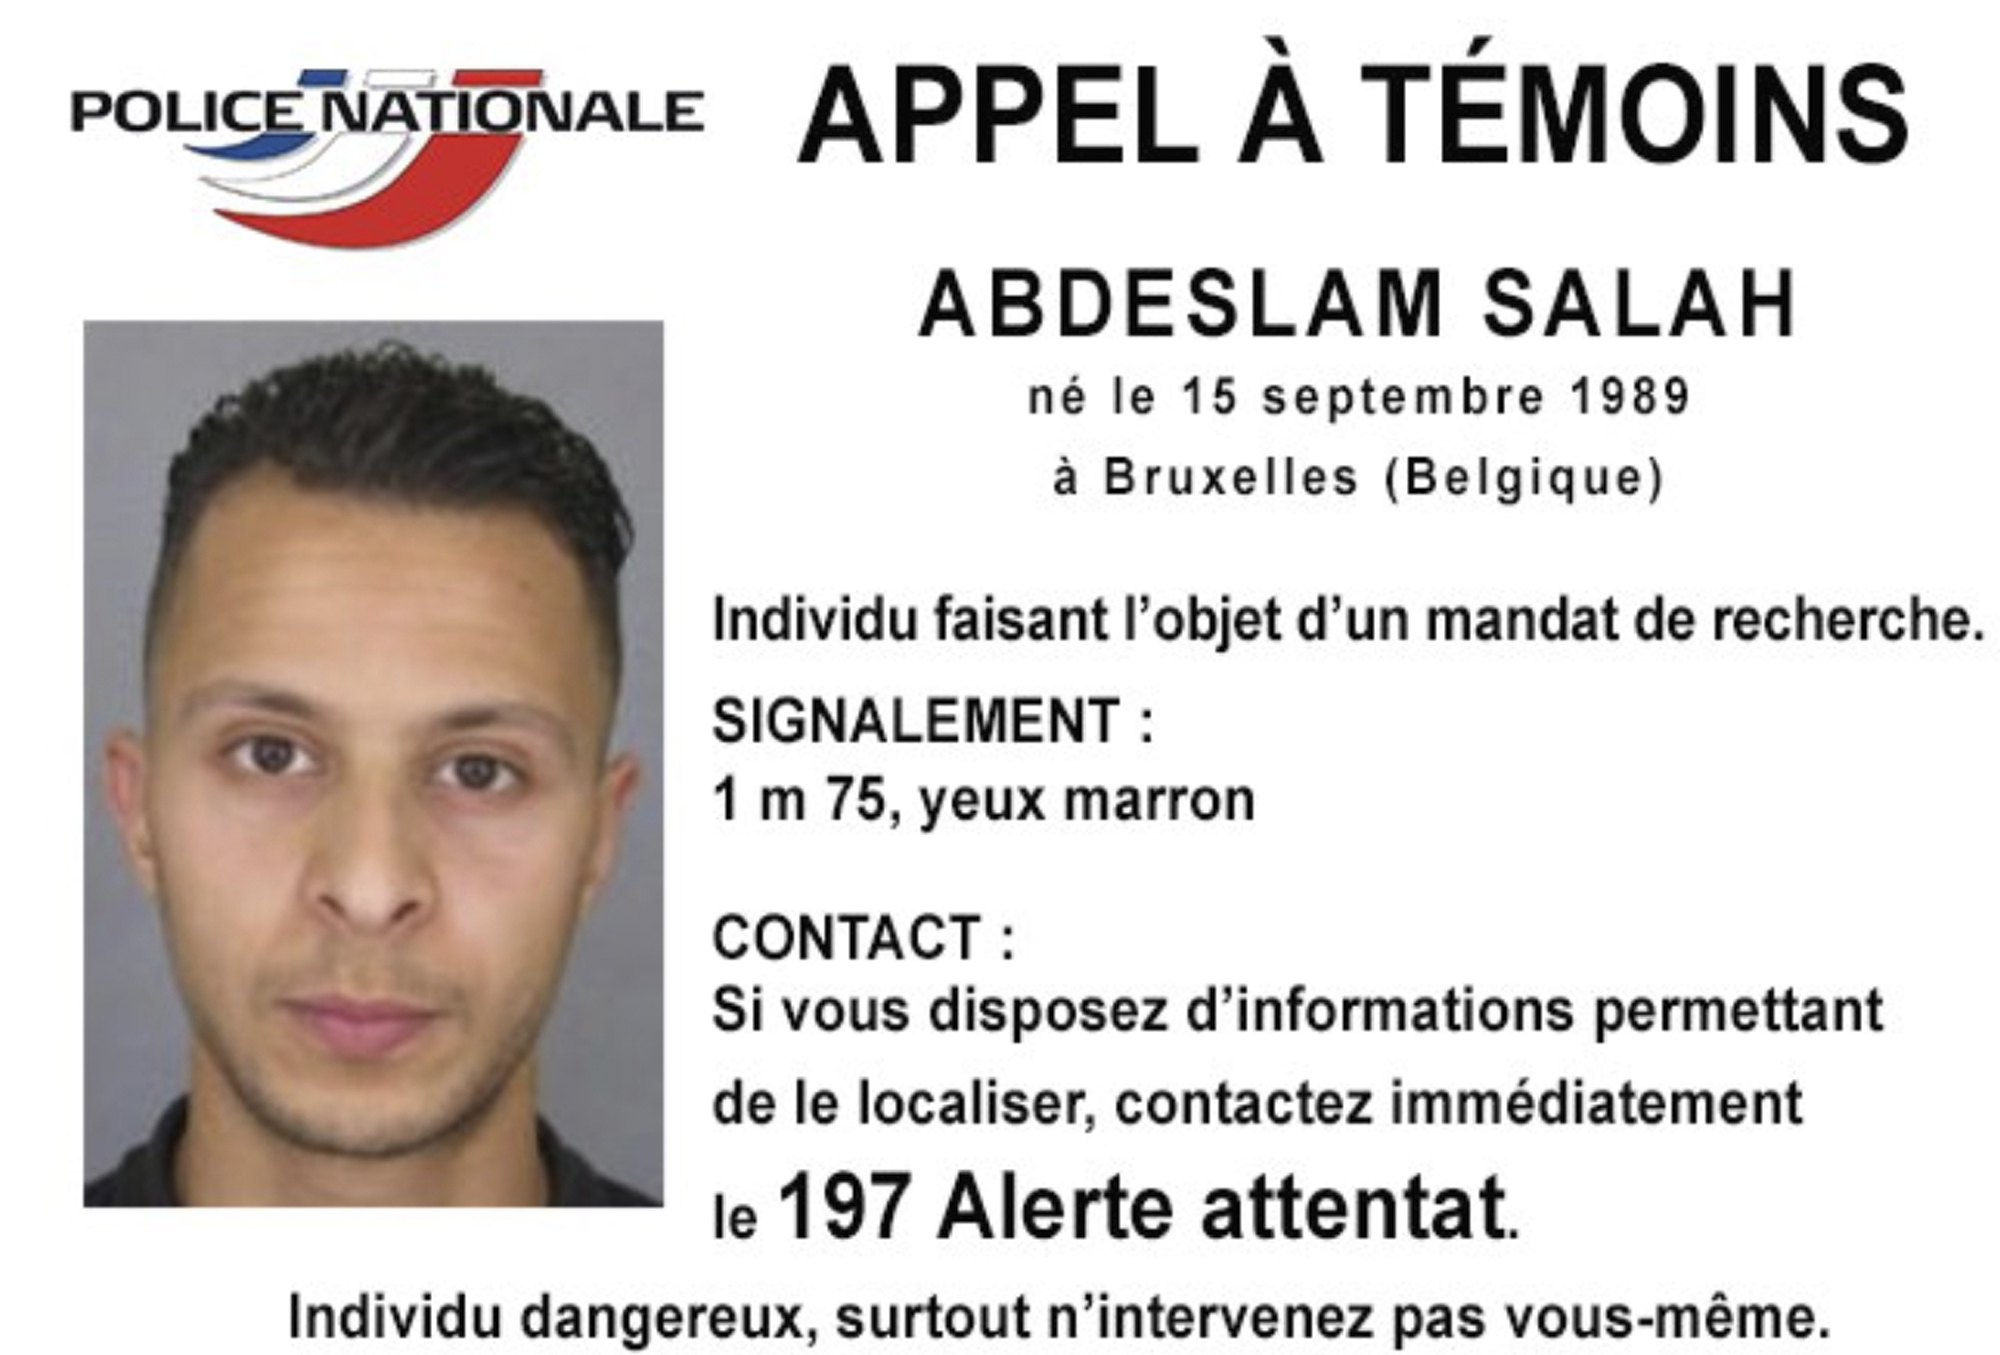 PHOTO: This undated file photo released, Nov. 13, 2015, by French Police shows 26-year old Salah Abdeslam, who is wanted by police in connection with recent terror attacks in Paris, as police investigations continue.